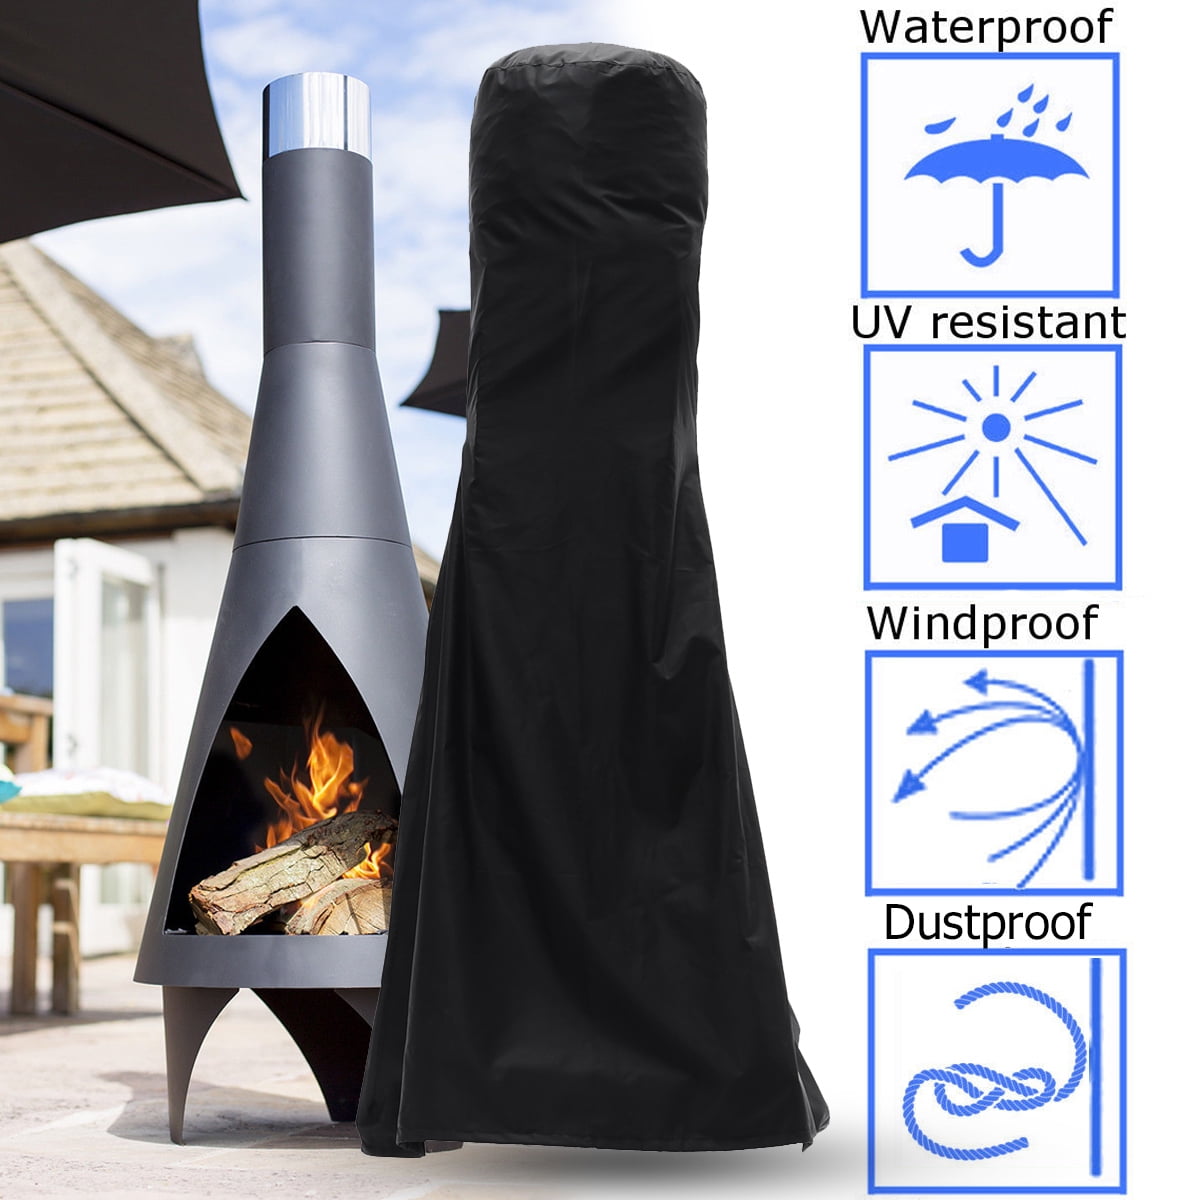 Chiminea Cover Waterproof Generic Outdoor Fire Pit Cover,Patio Chiminea Cover,Oxford Polyester Chiminea Protective Cover,Durable Outdoor Garden Patio Heater 